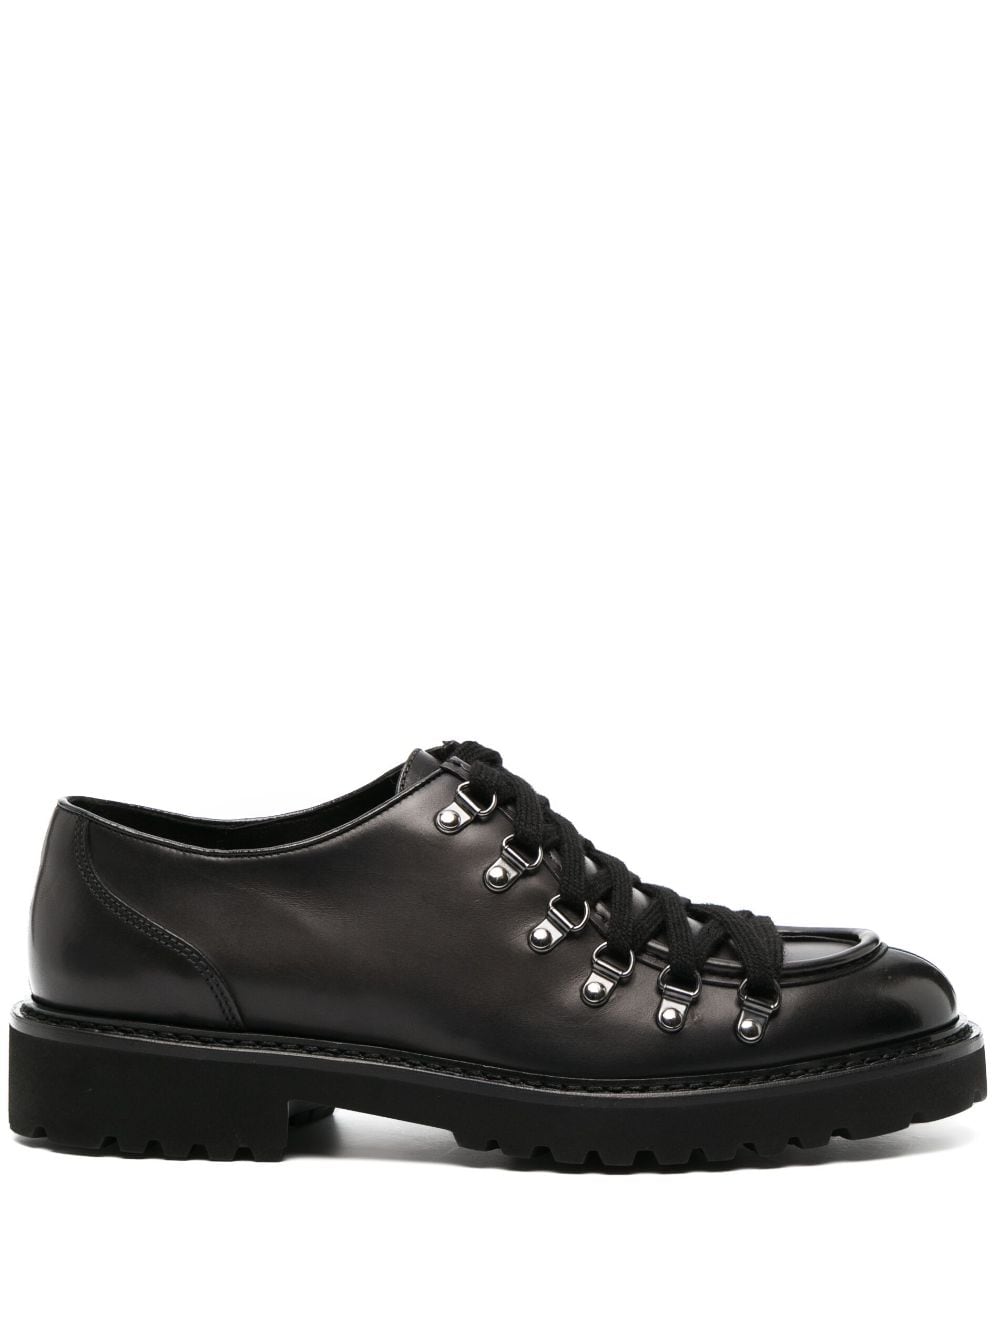 Doucal's round-toe leather lace-up shoes - Black von Doucal's